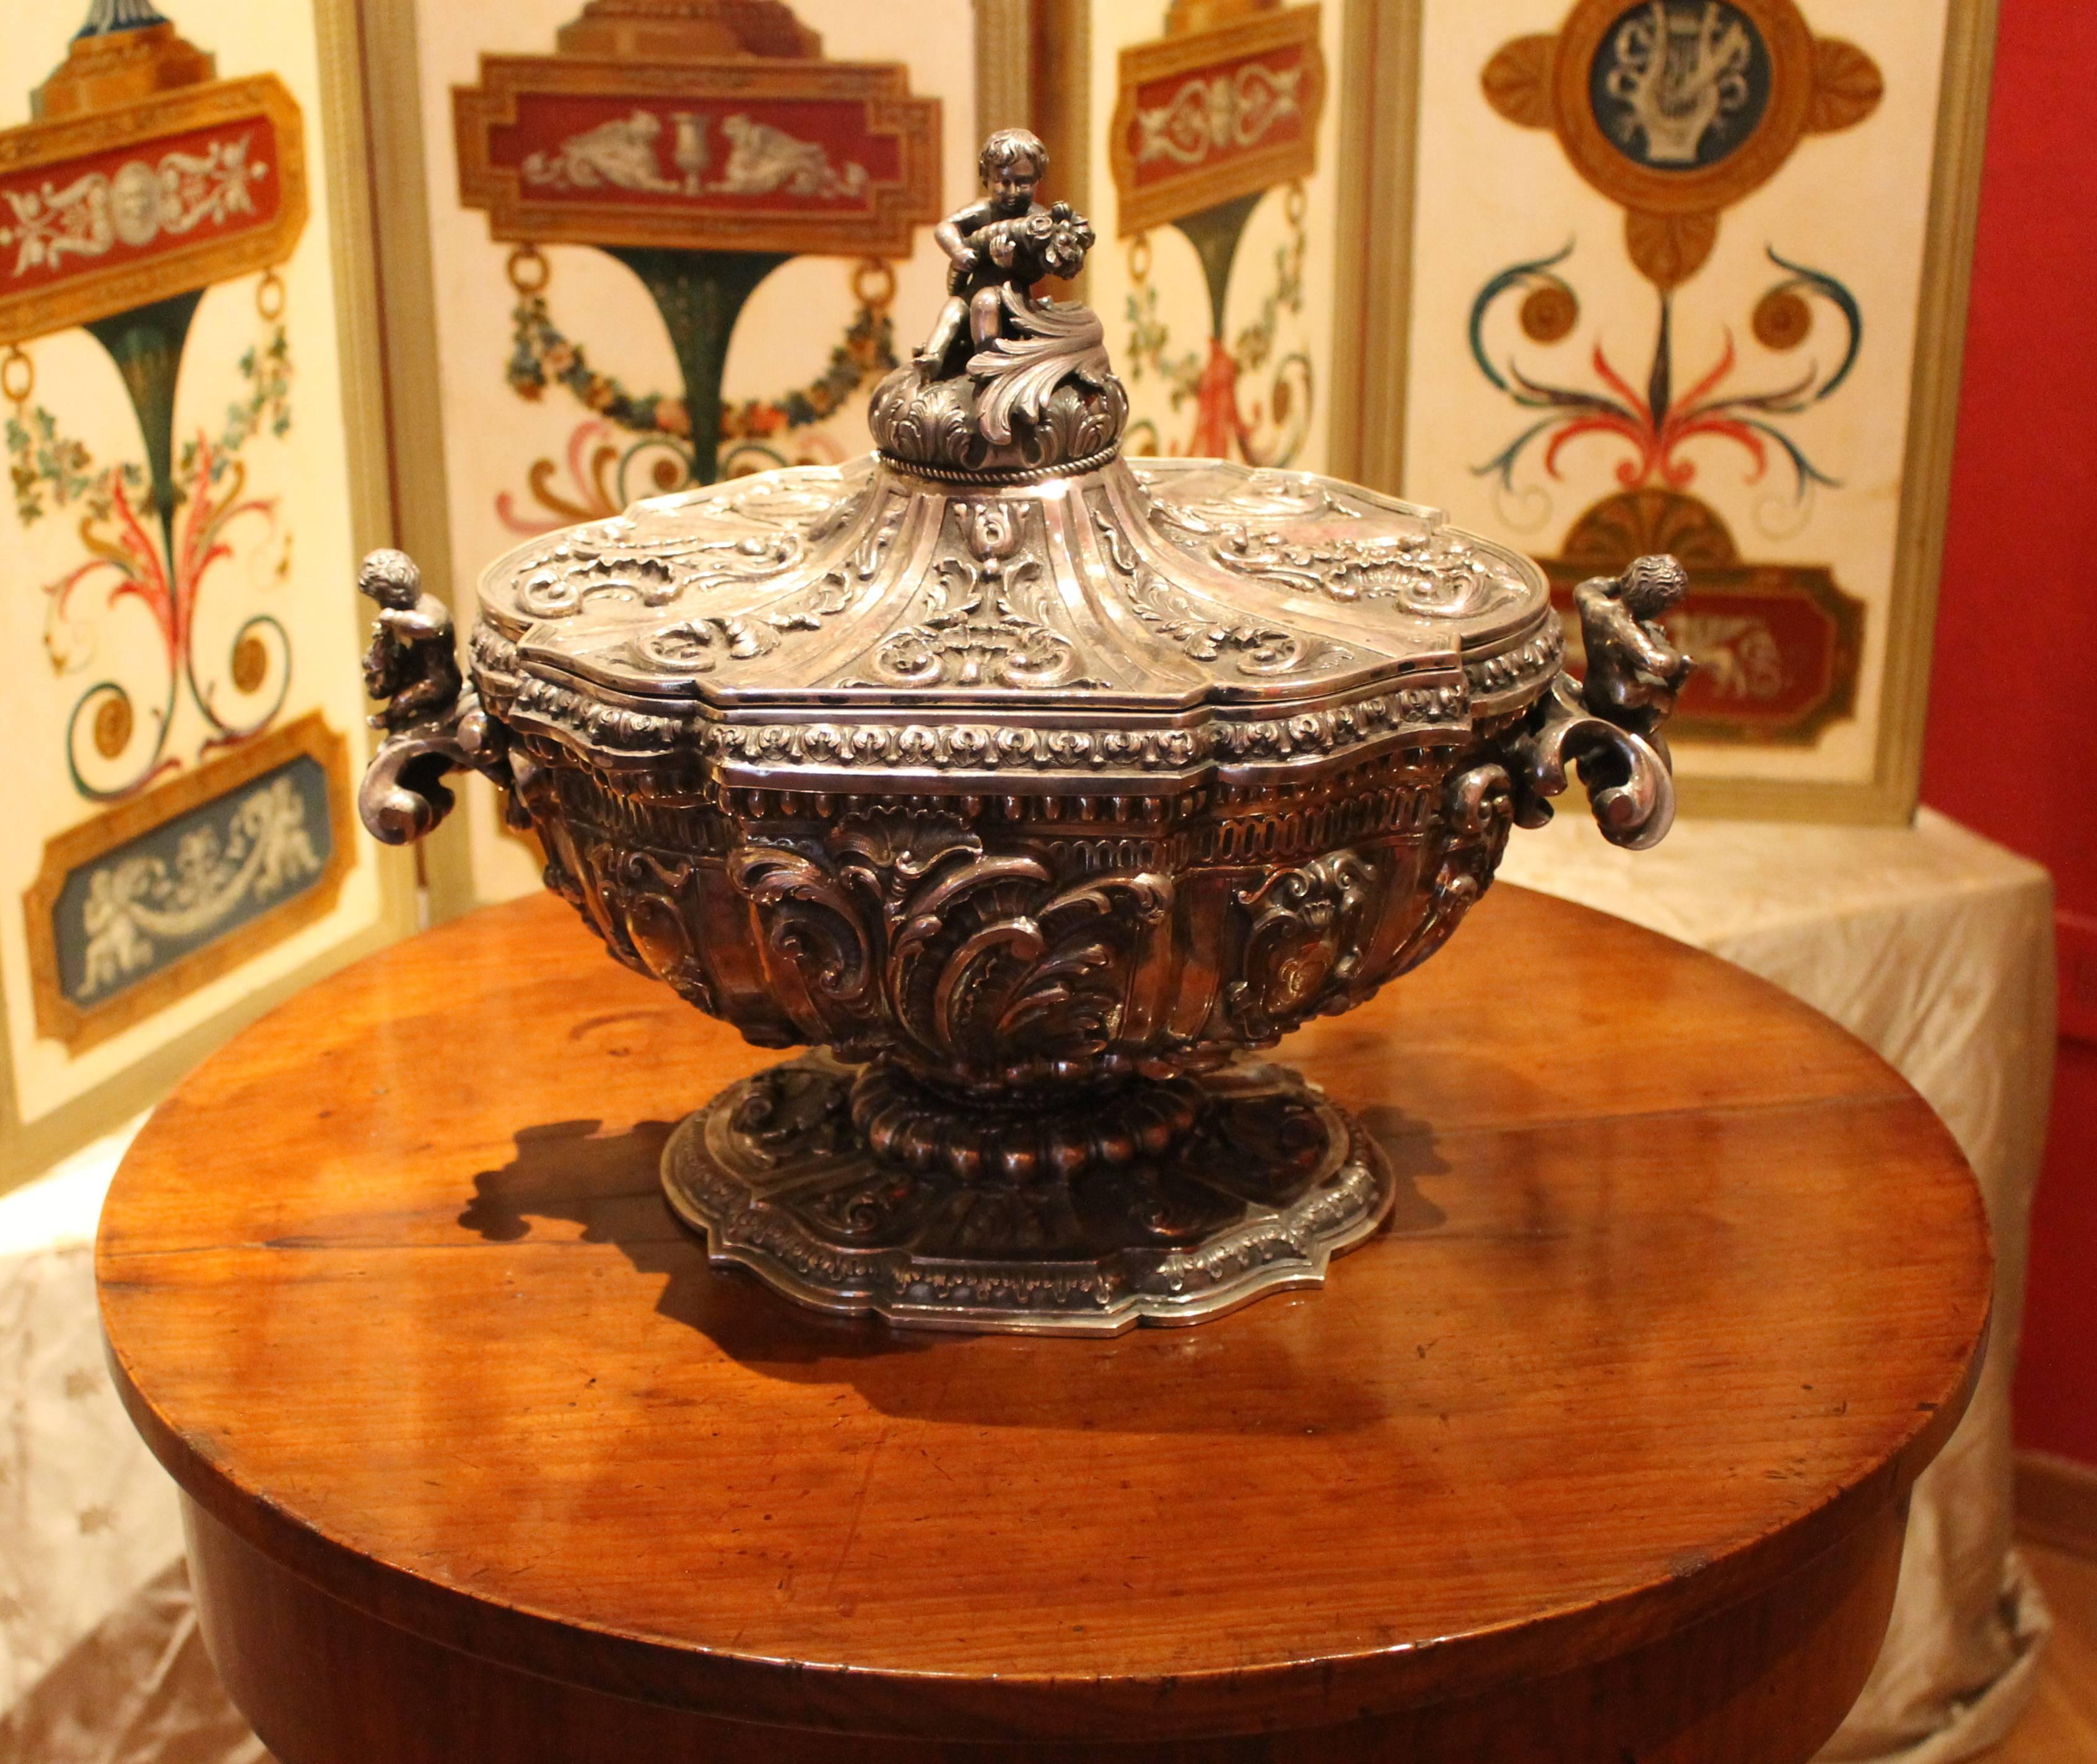 Gold Plate 19th Century Italian Baroque Style Silver Centerpiece Bowl or Soup Tureen